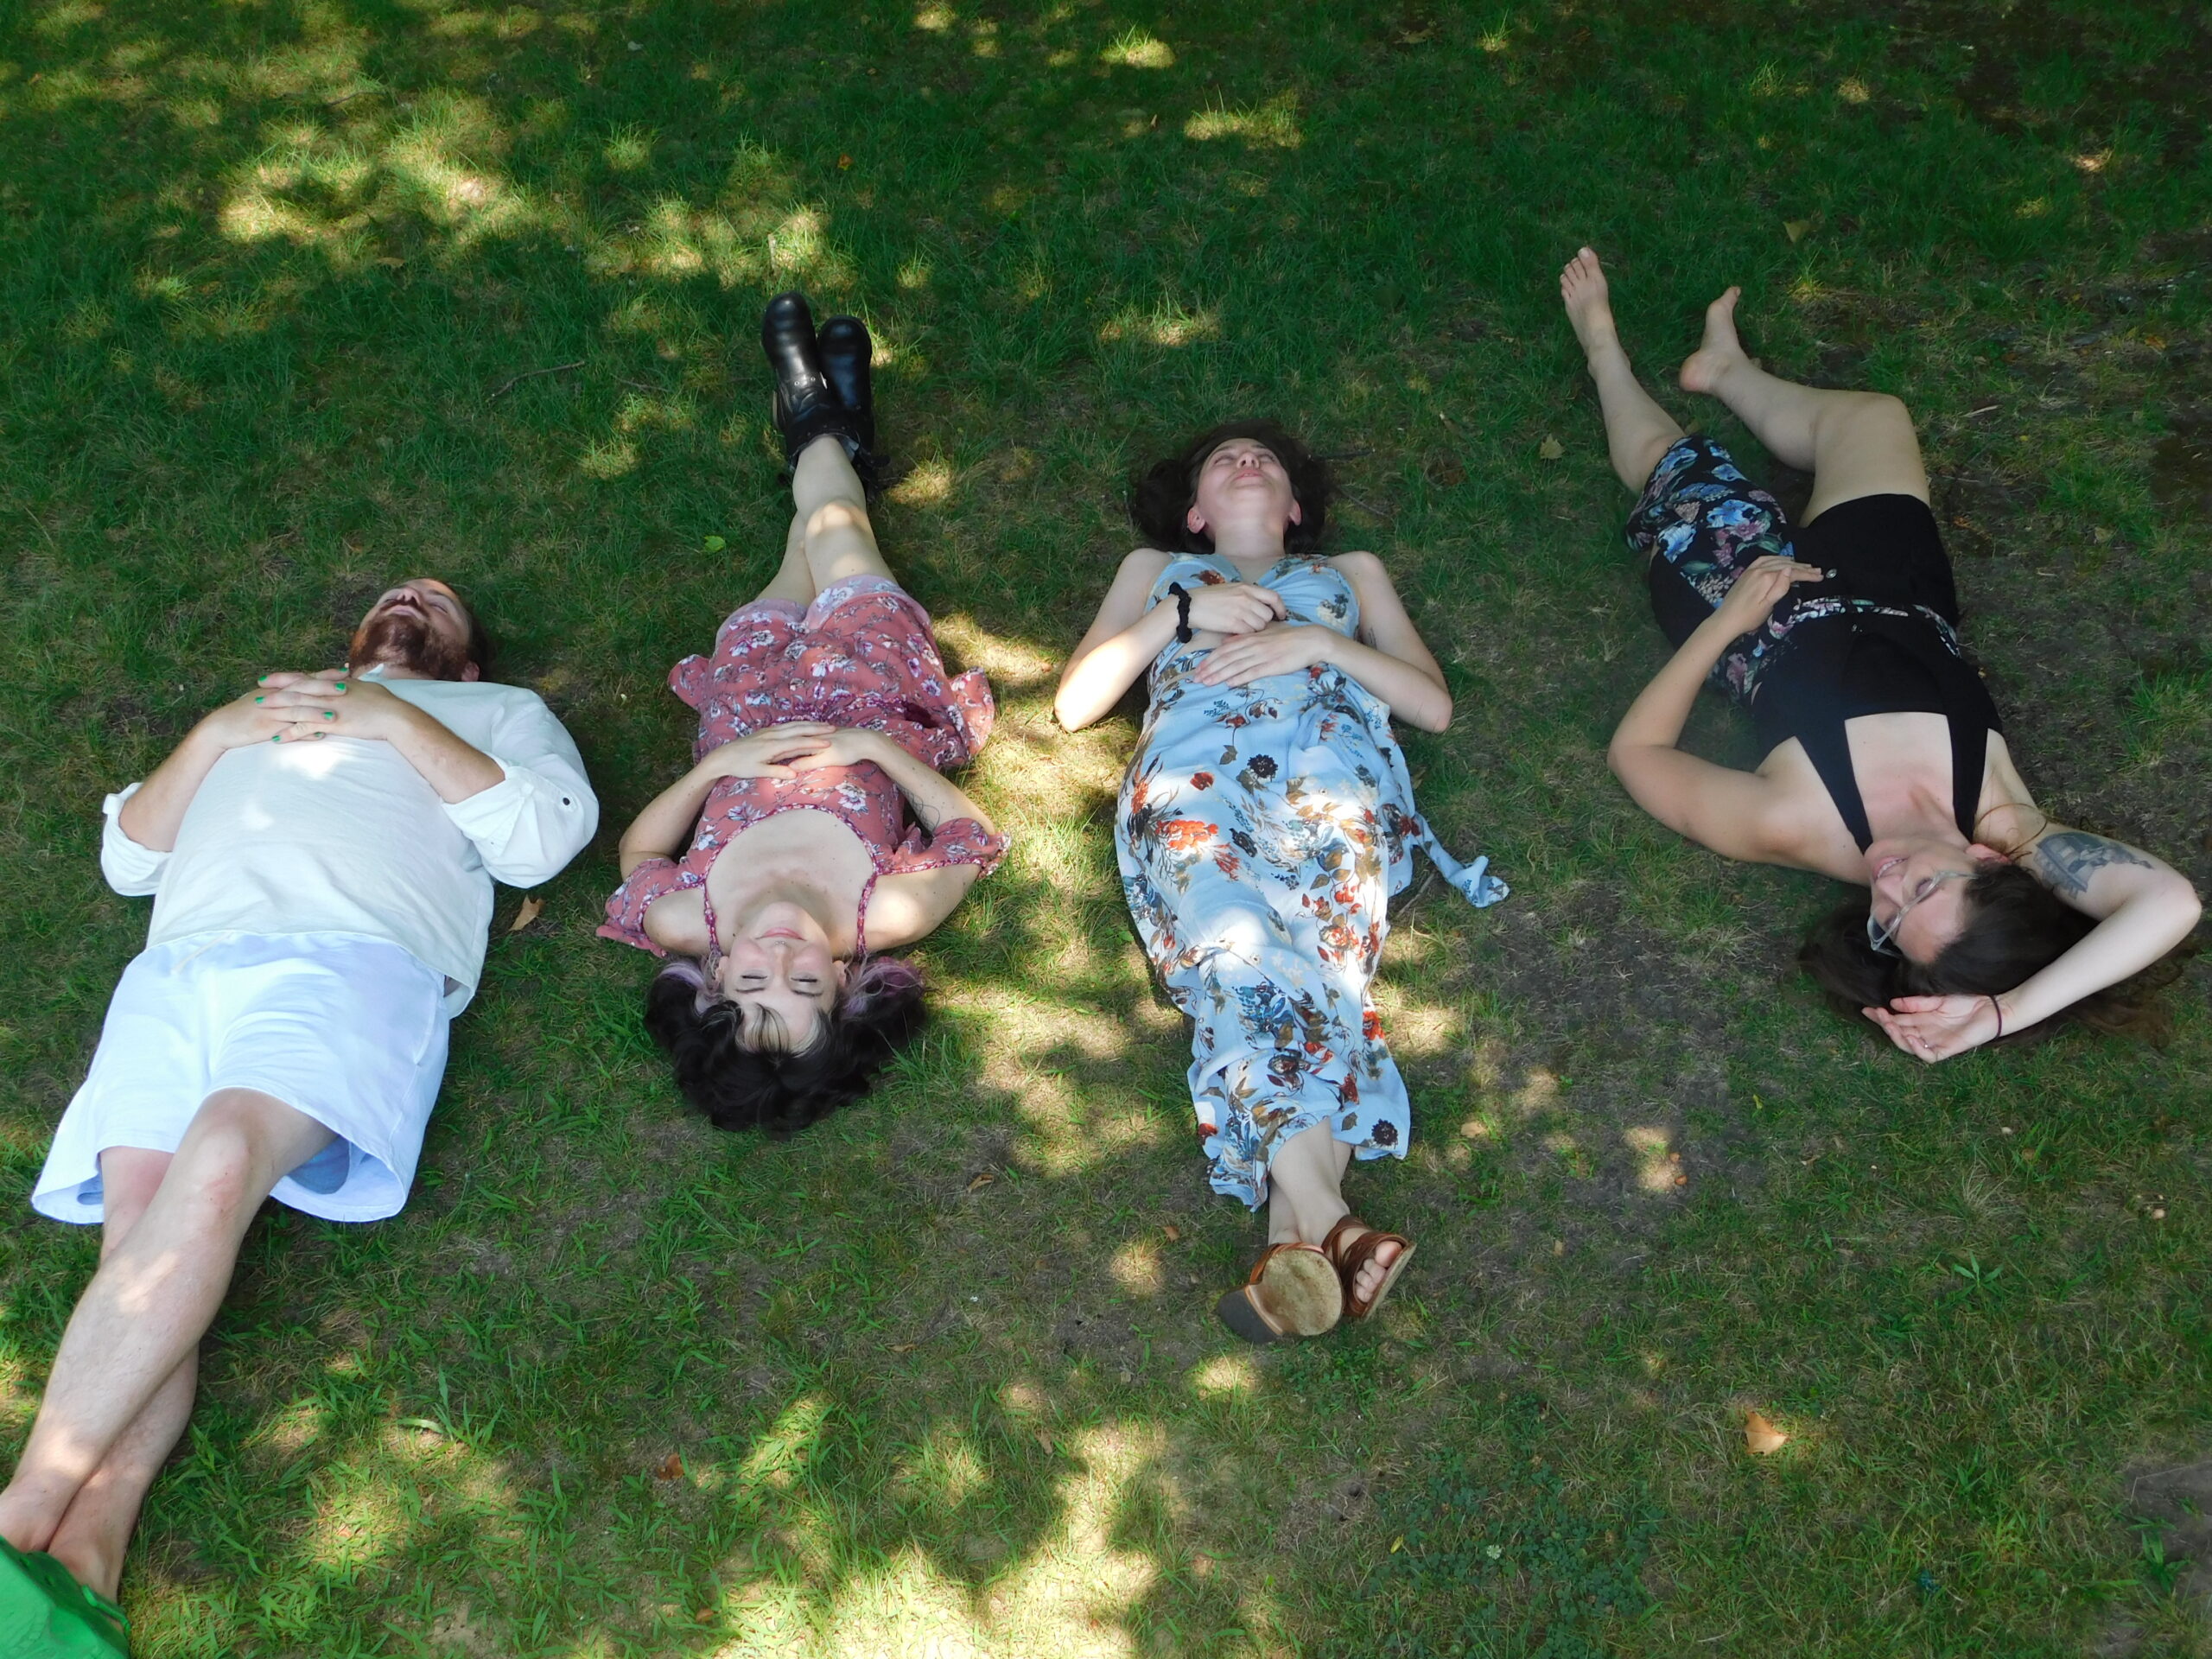 Beth's Band "How's About Charlie" laying in the grass